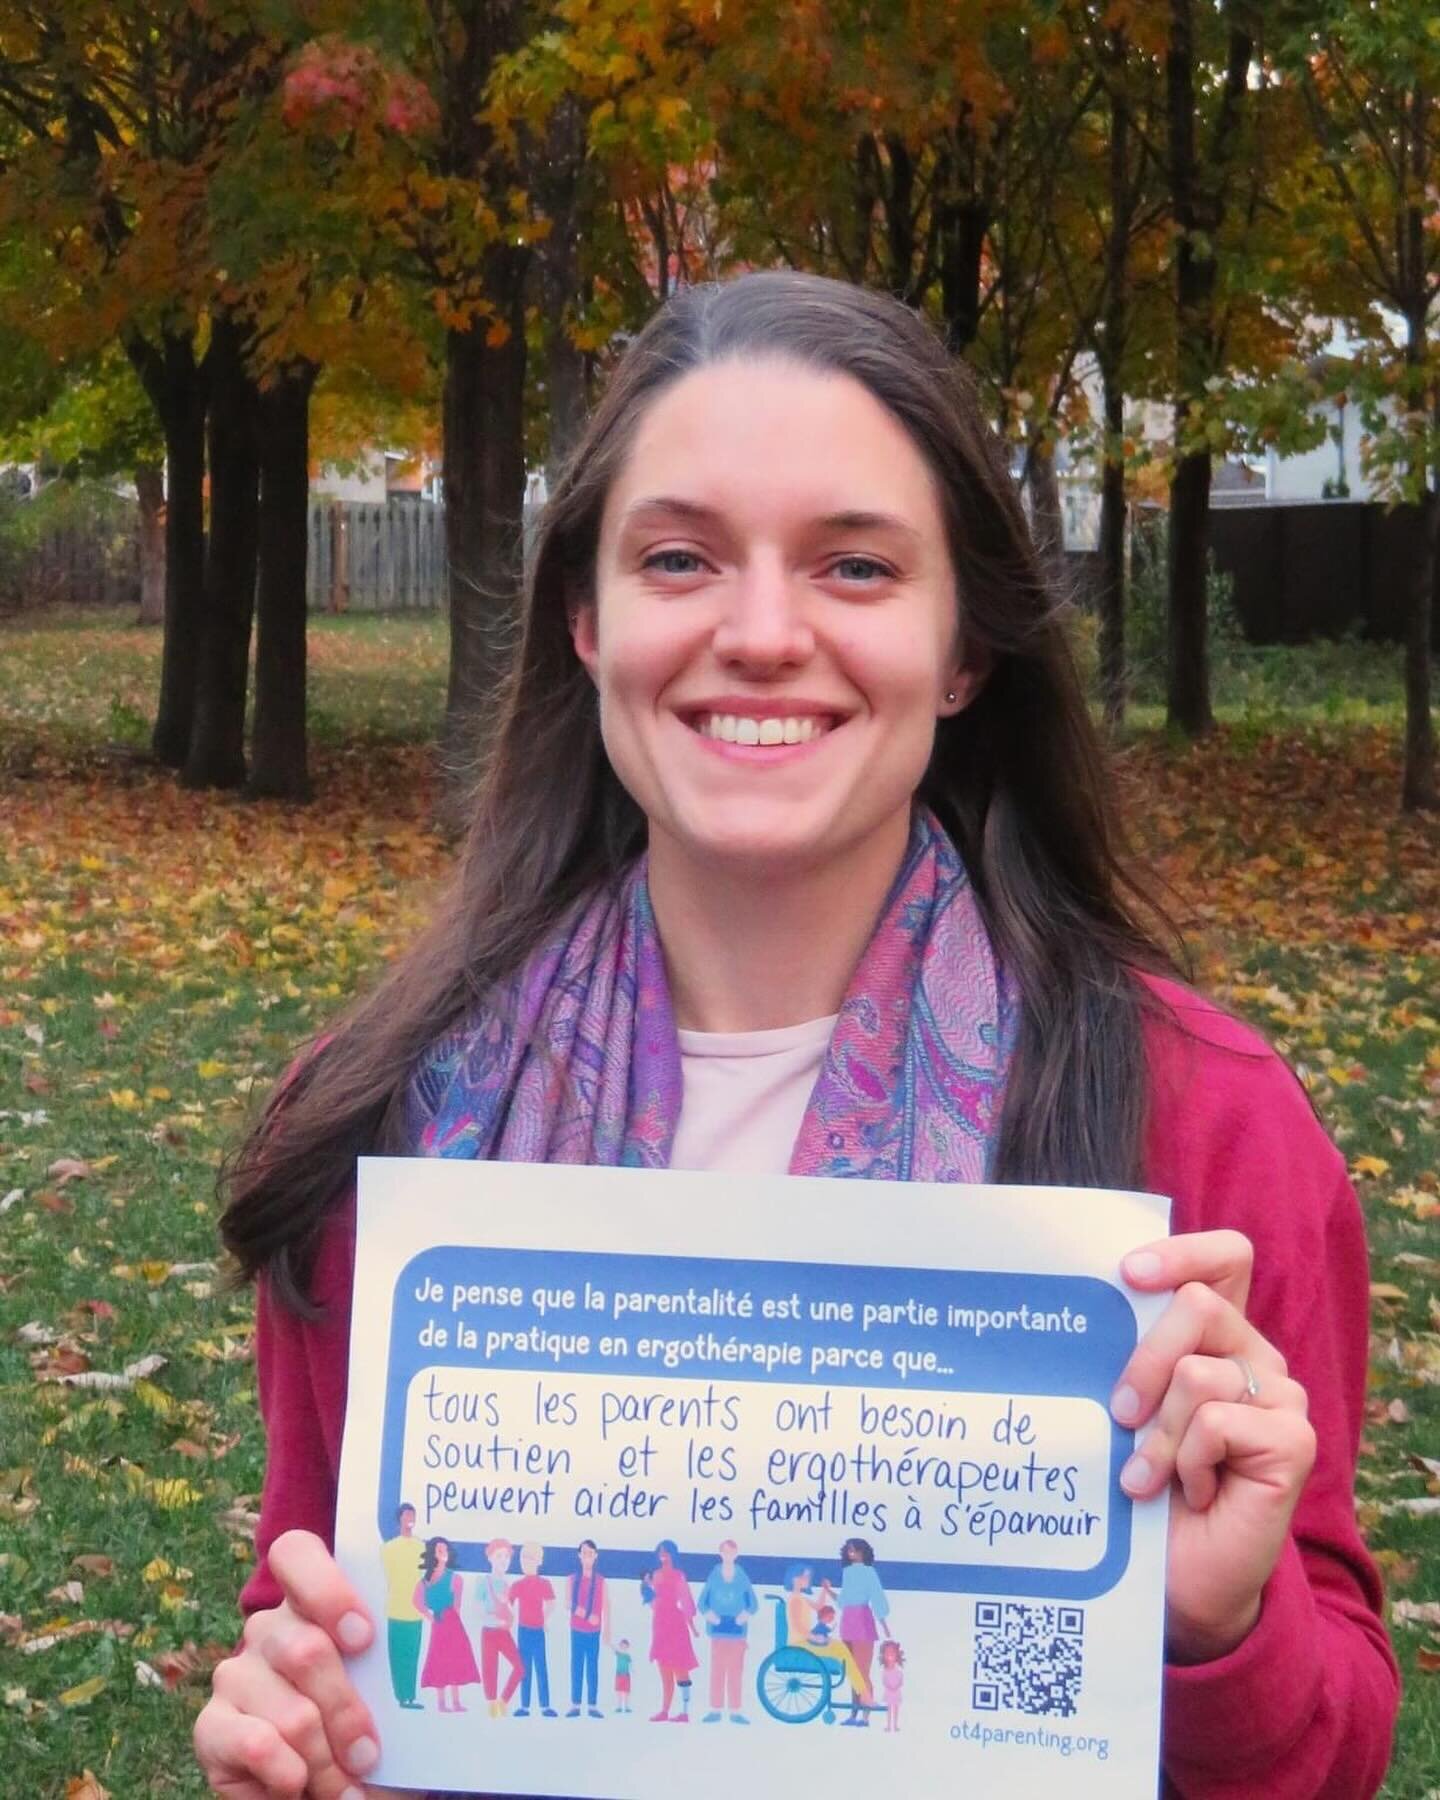 Evelina is an OT and postdoctoral research fellow at the University of Toronto Scarborough @uoft and she thinks that parenting is an important part of OT practice because... &ldquo;all parents need support and occupational therapists can help familie